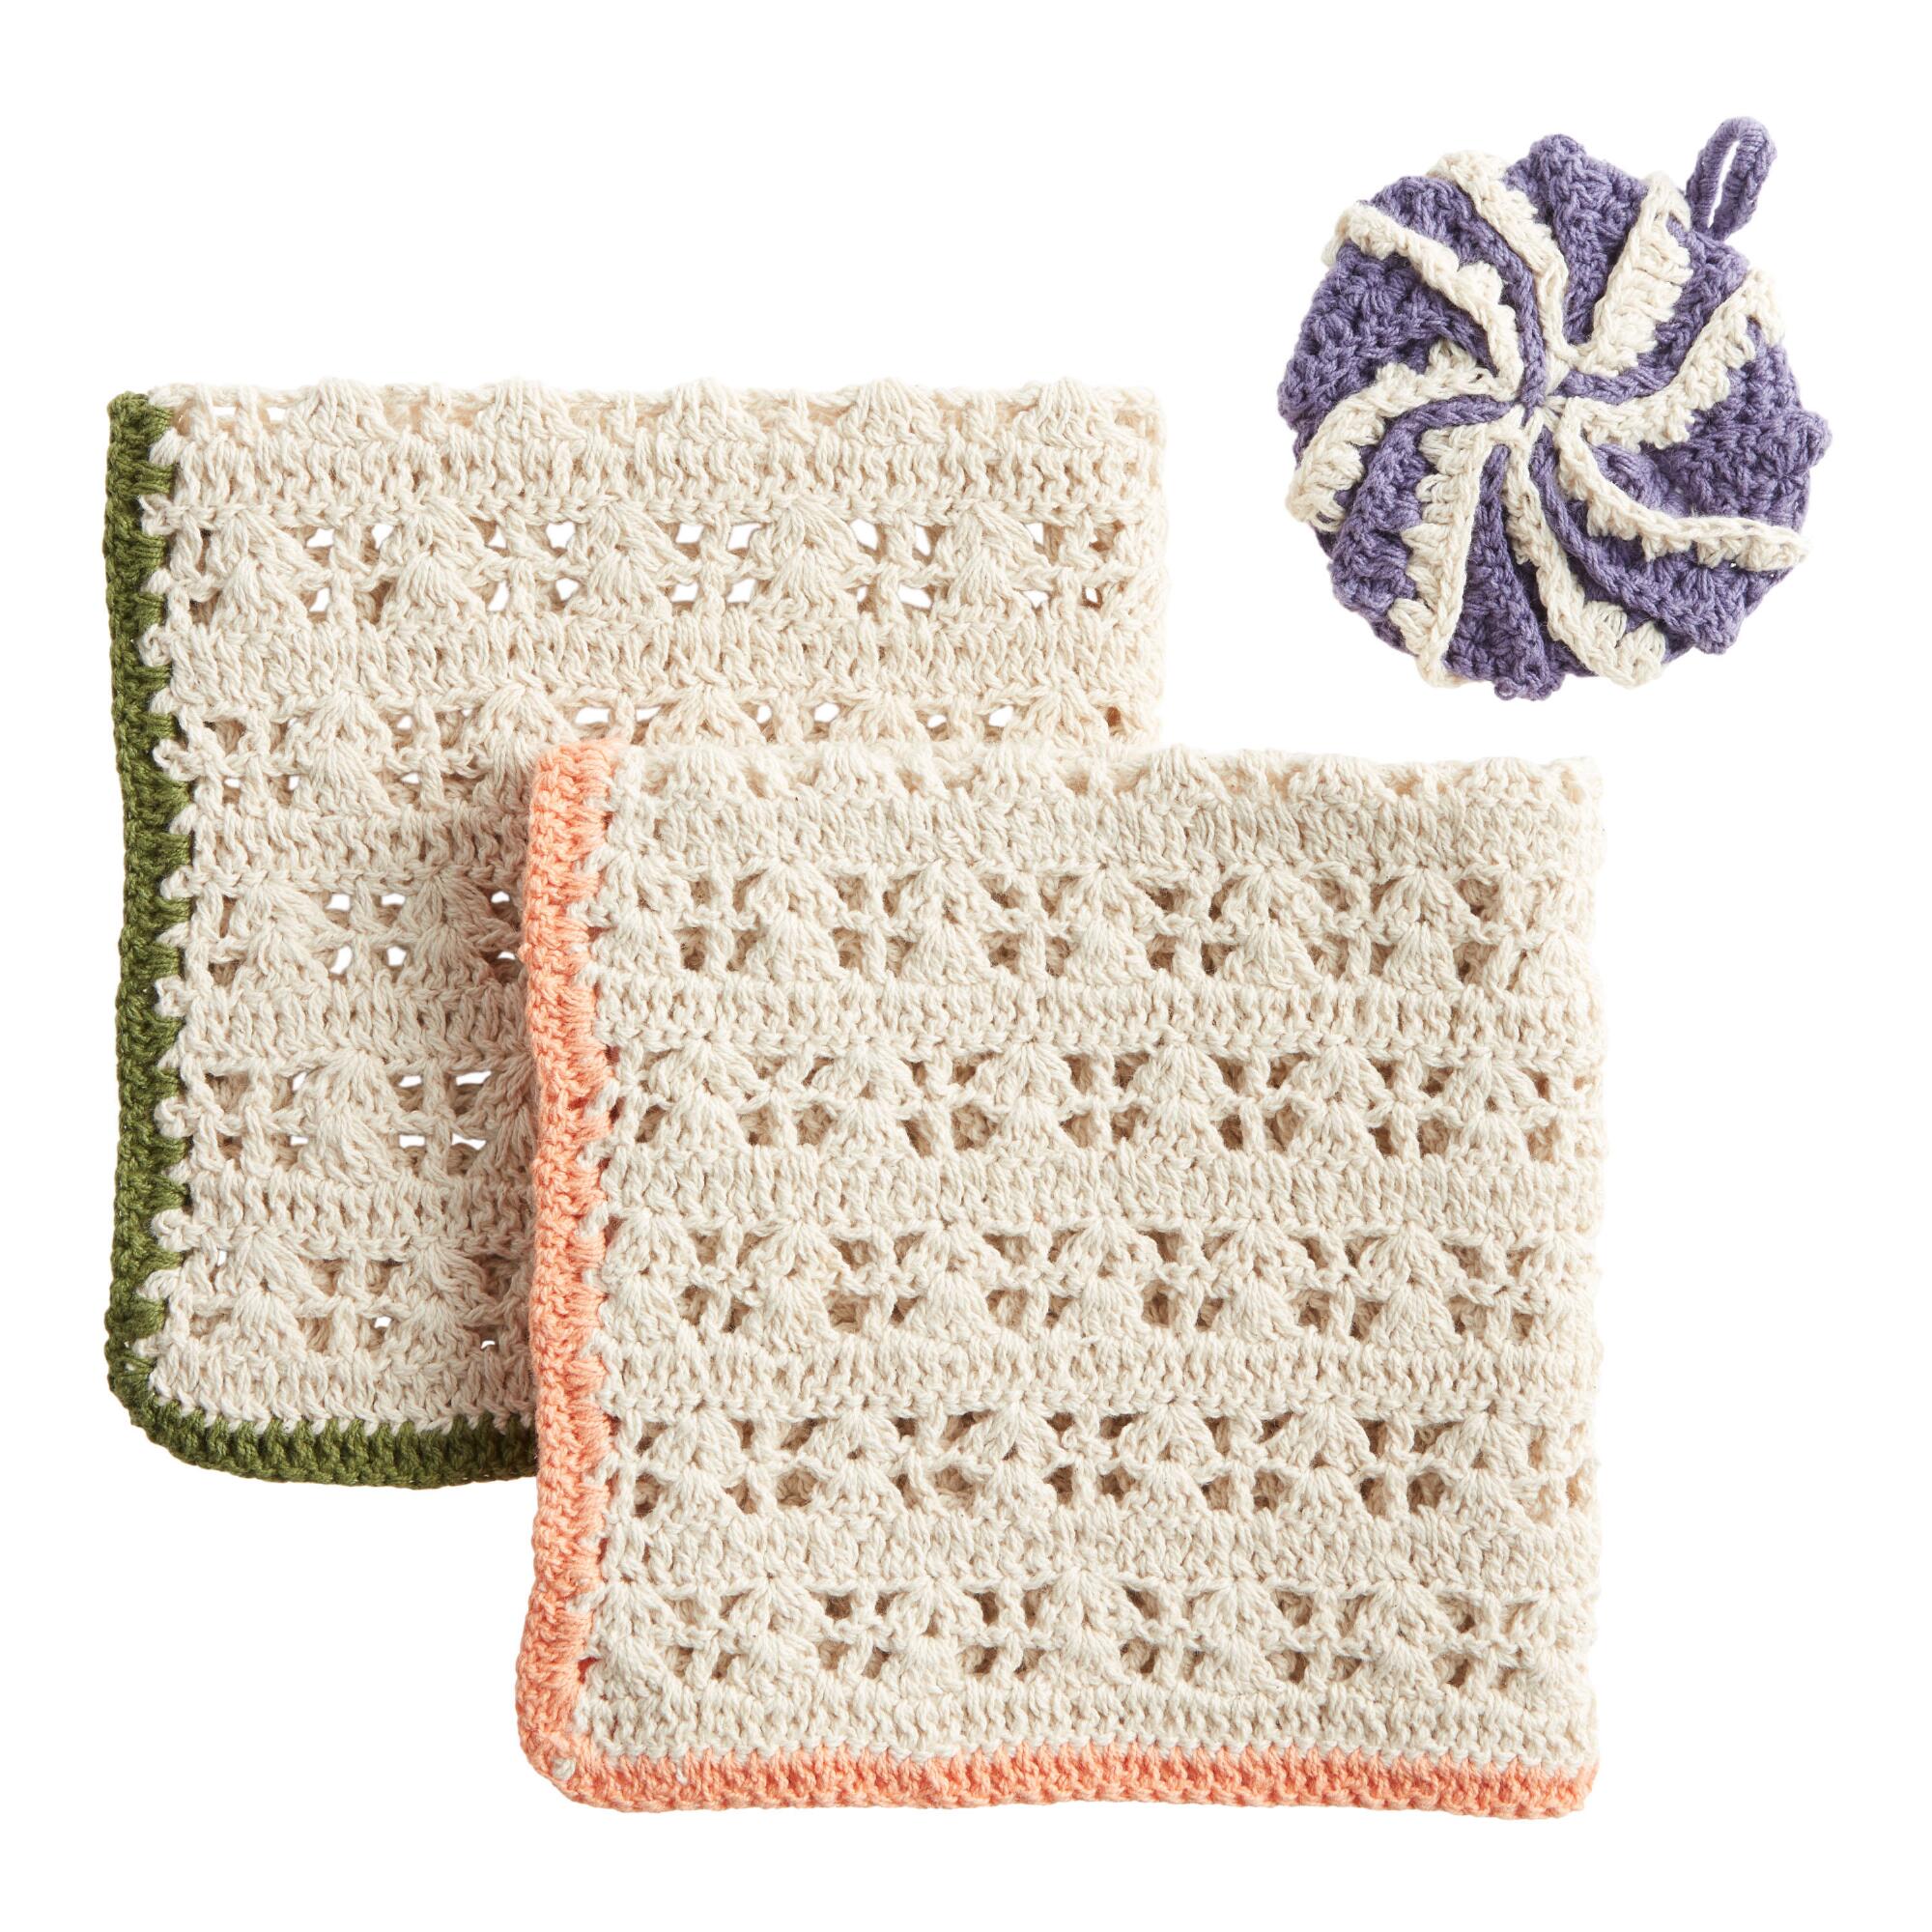 Crocheted Dishcloth and Scrubber 3 Piece Set: Natural - Cotton - Small by World Market